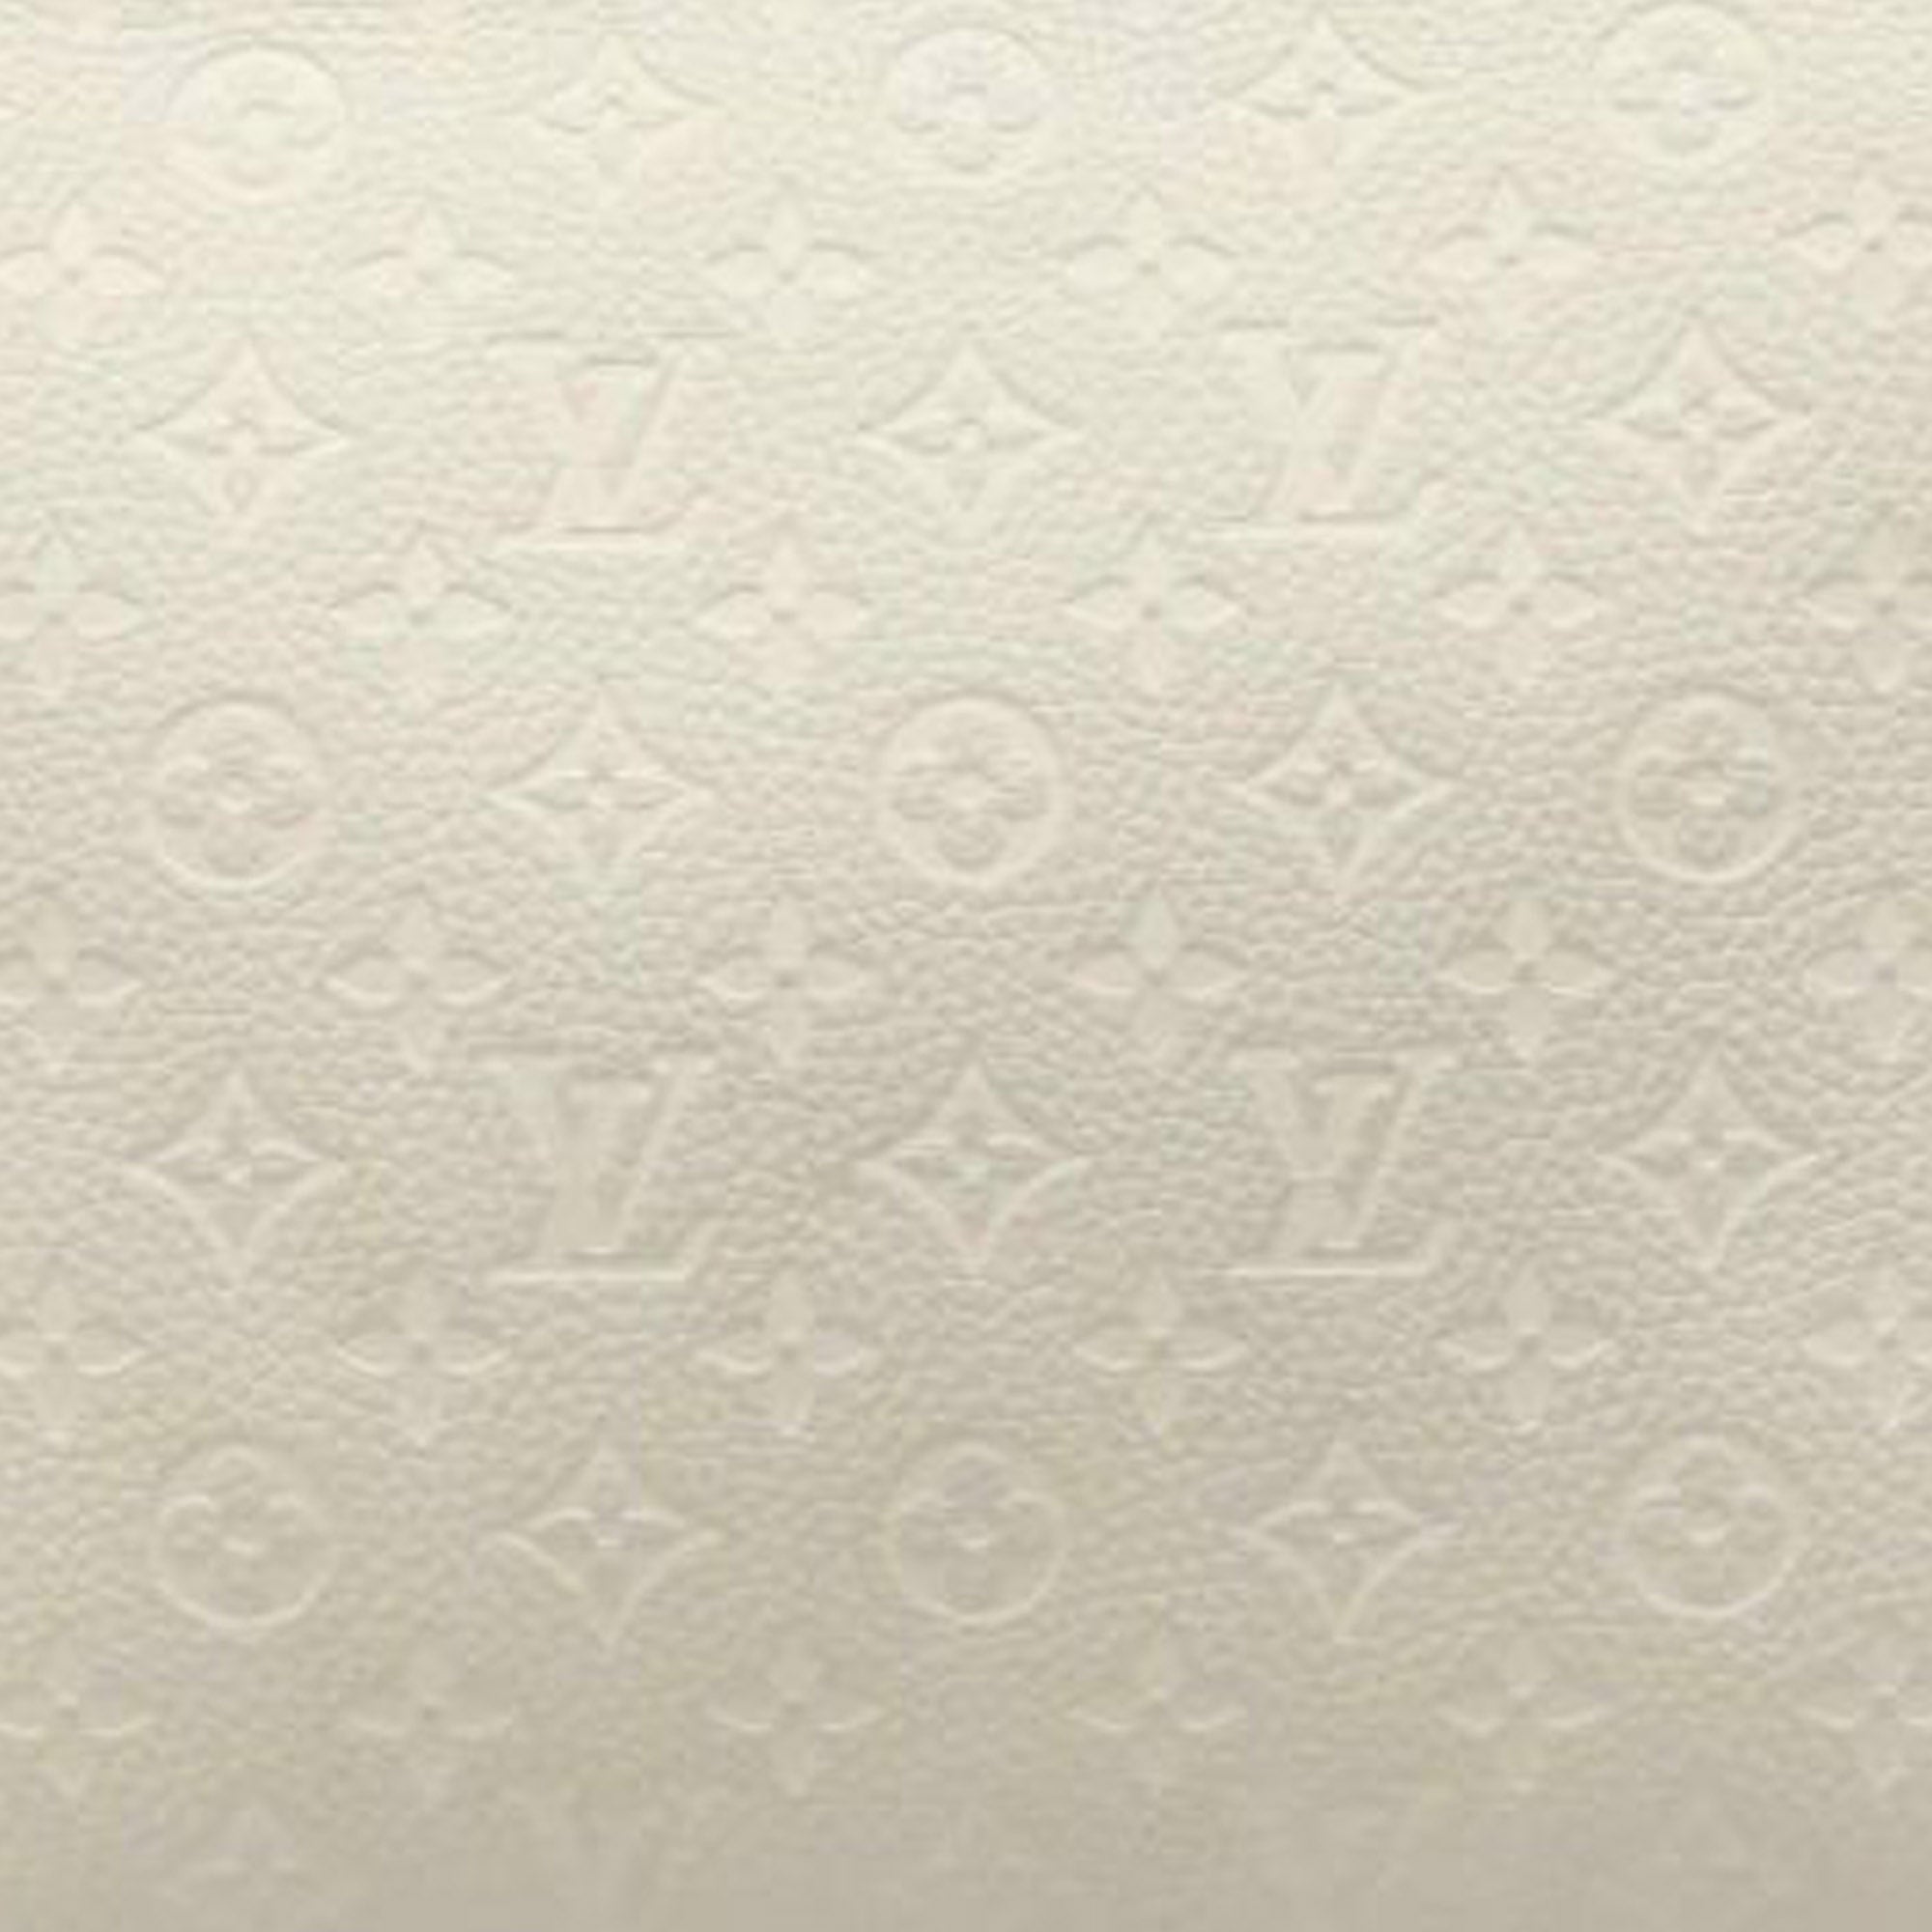 Milky Leather Louis Vuitton Patterns Iphone Wallpaper